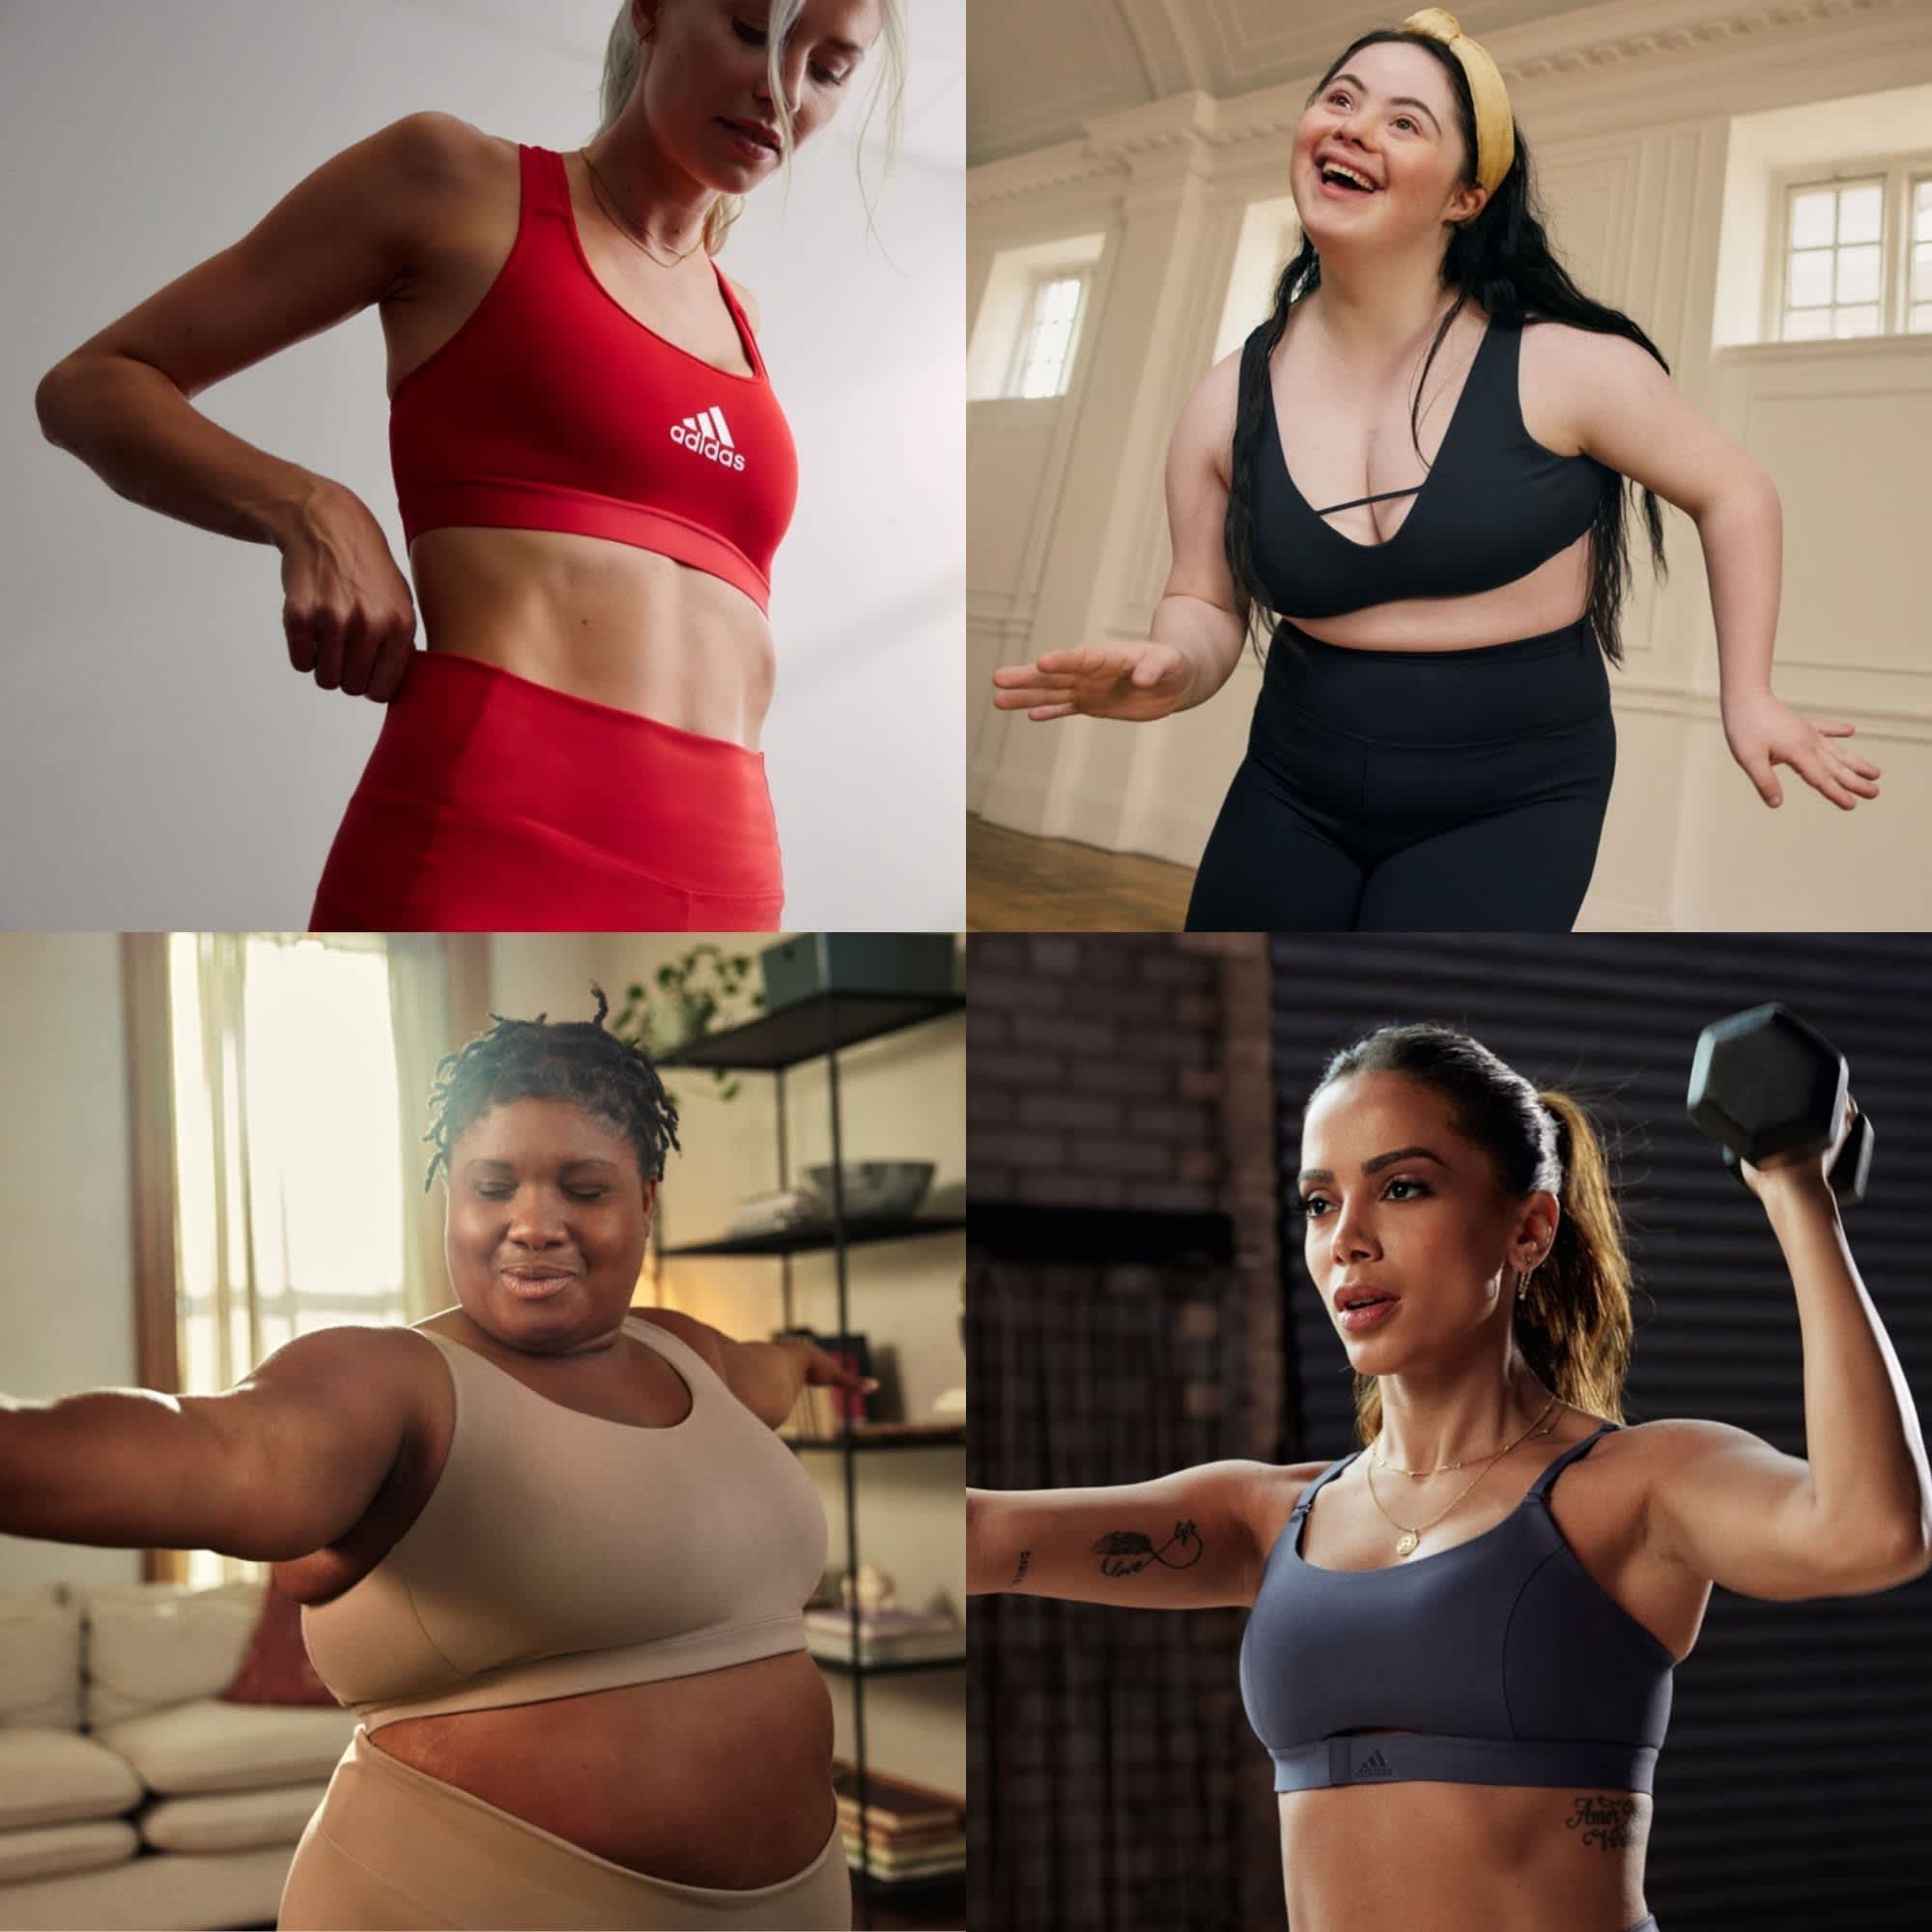 Sports Bra Issues – 5 Signs You're Wearing the Wrong Sports Bra